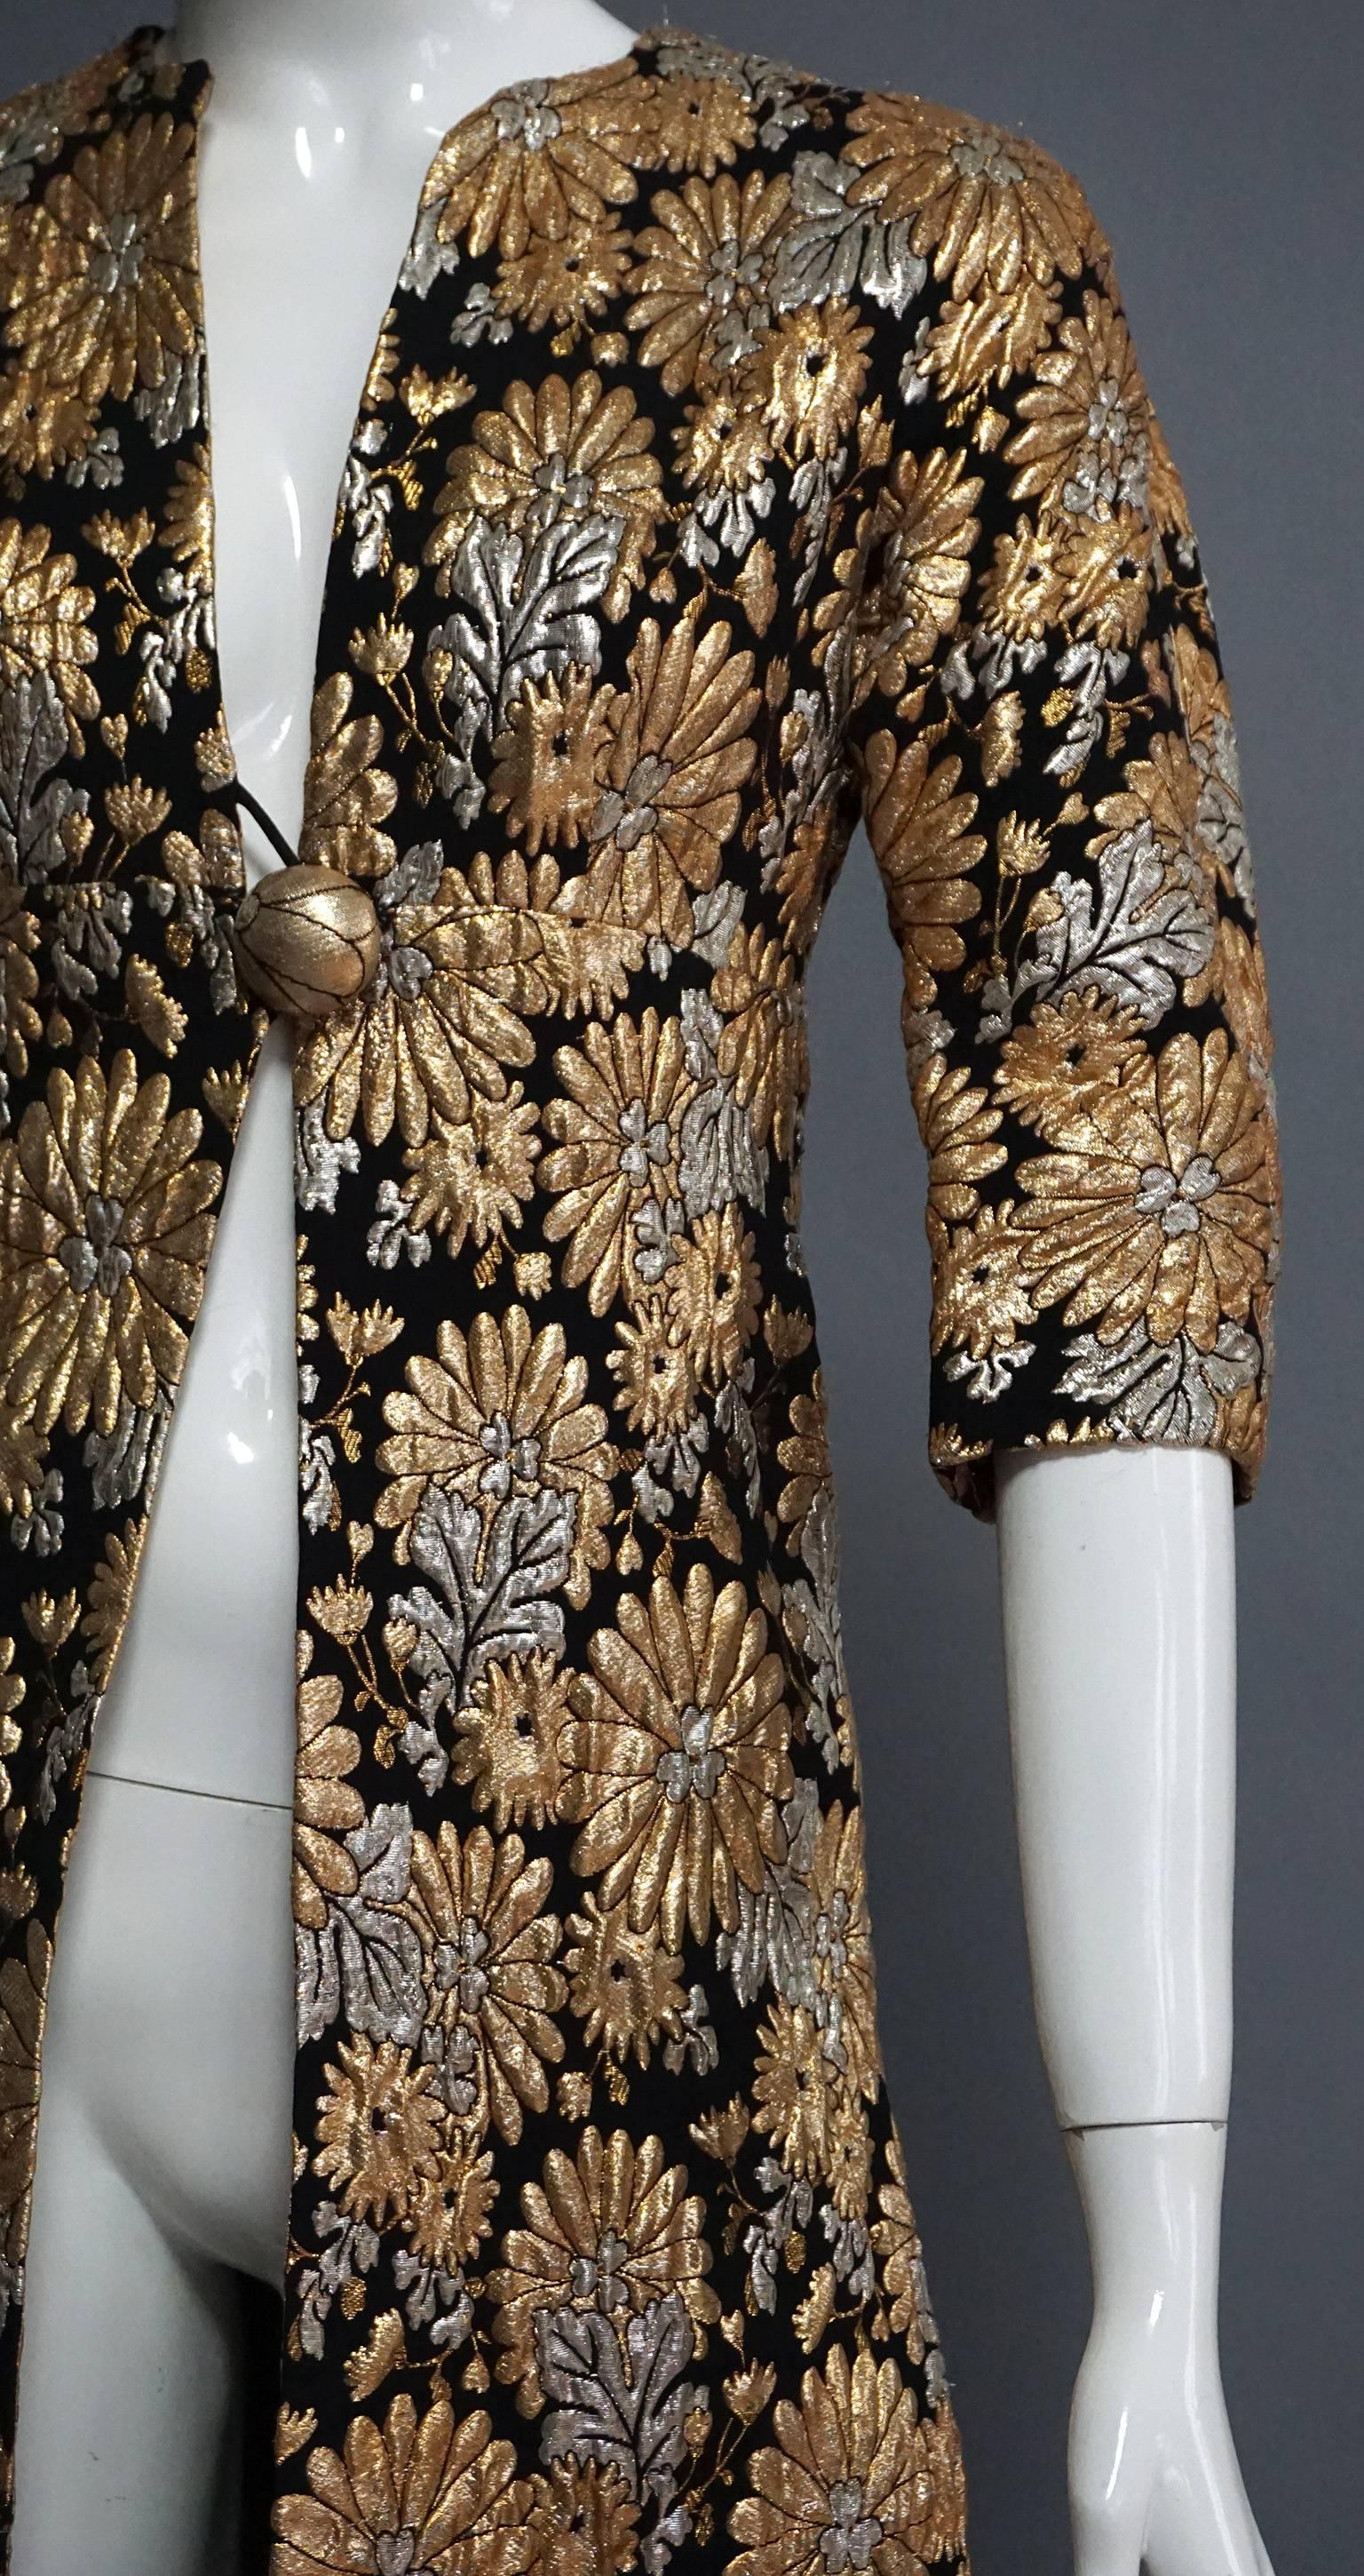 This coat is all about the fabric. The golf and silver lame threads create a floral pattern that is simply stunning. The mixed metallics are woven on a black backdrop, making them pop even more. The coat is fitted at the waist. At the front center